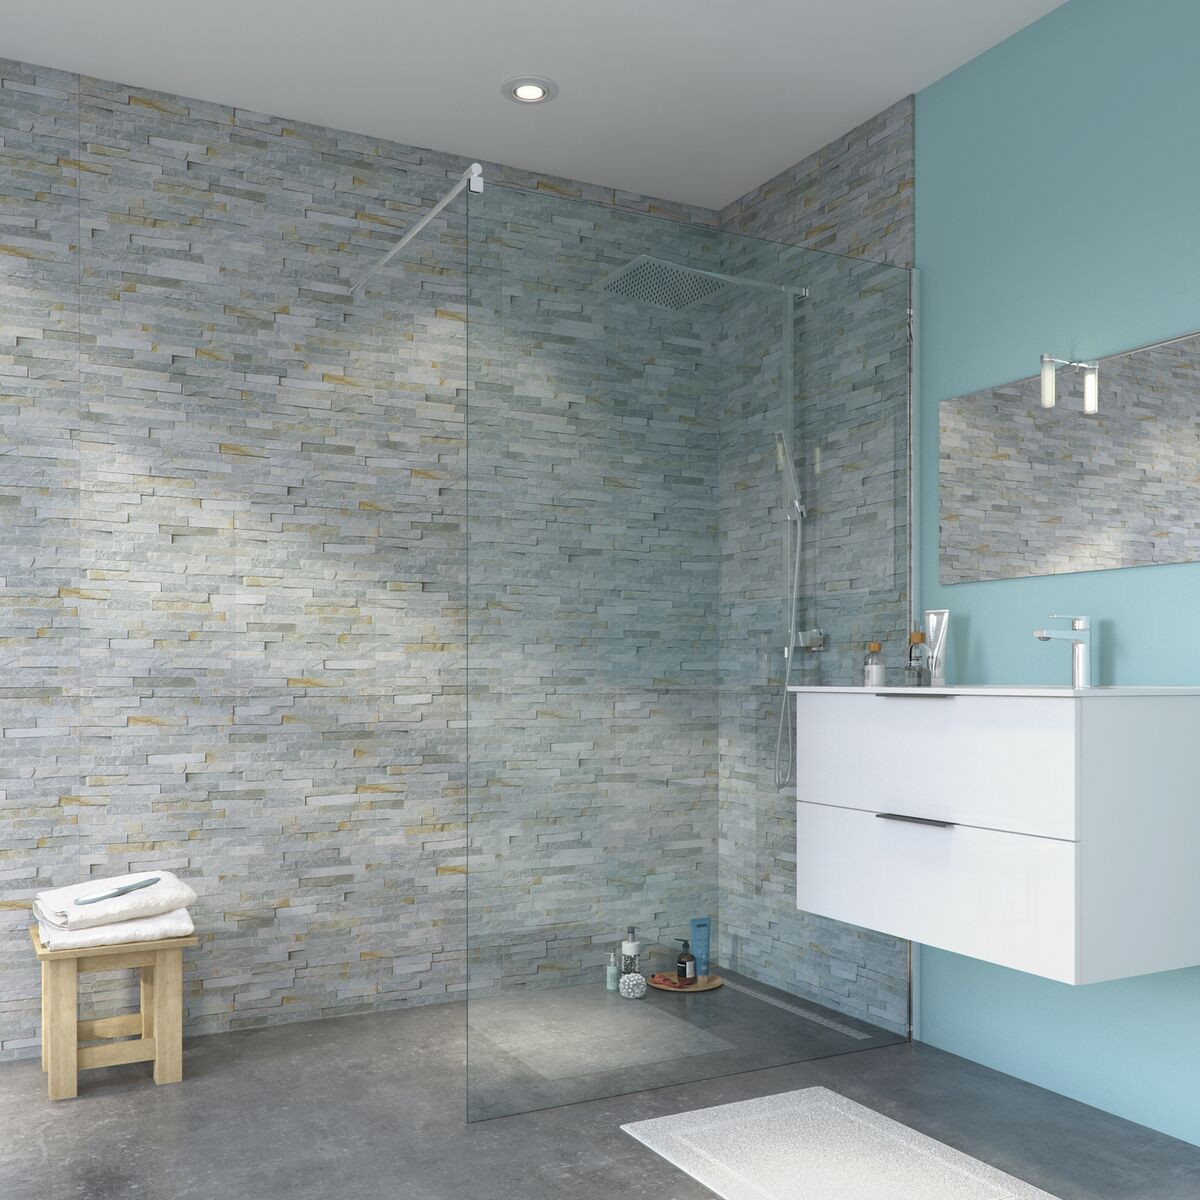 Shower stall and bathroom sink with angelo stone wall panel backdrop.